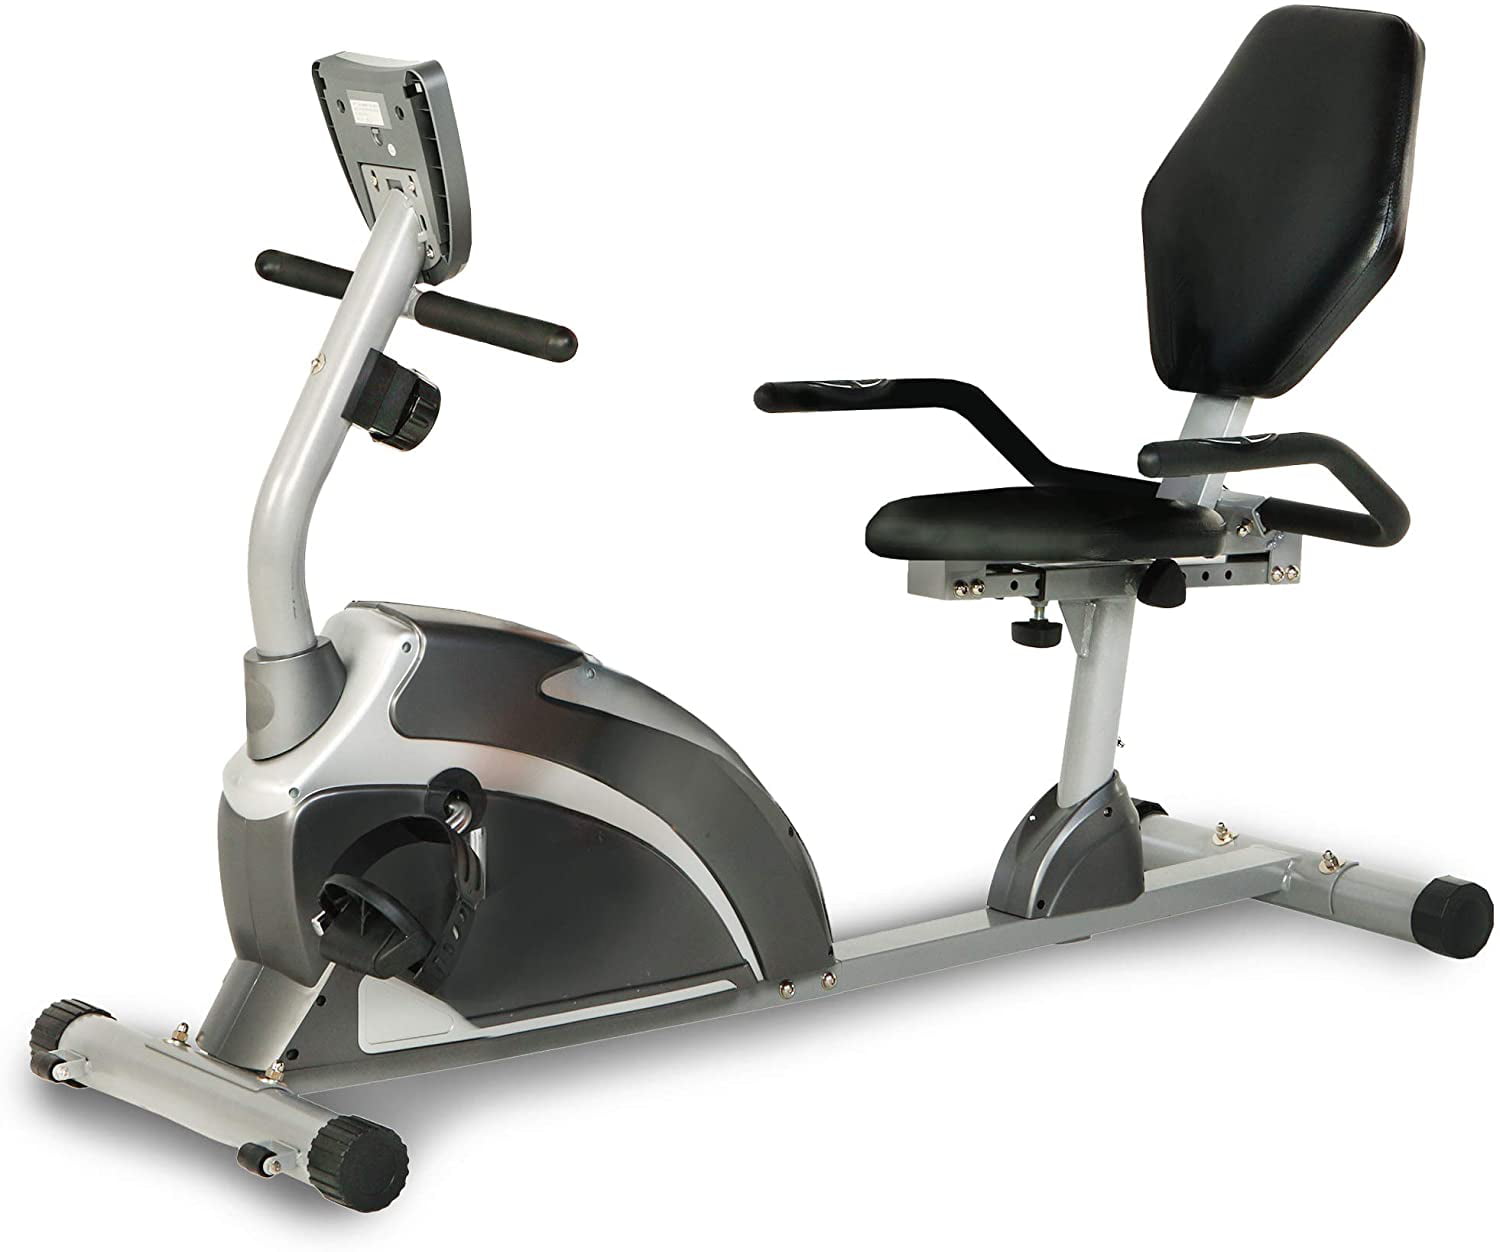 EXERPEUTIC 900XL Recumbent Exercise Bike with Pulse300 lbs Weight Capacity 